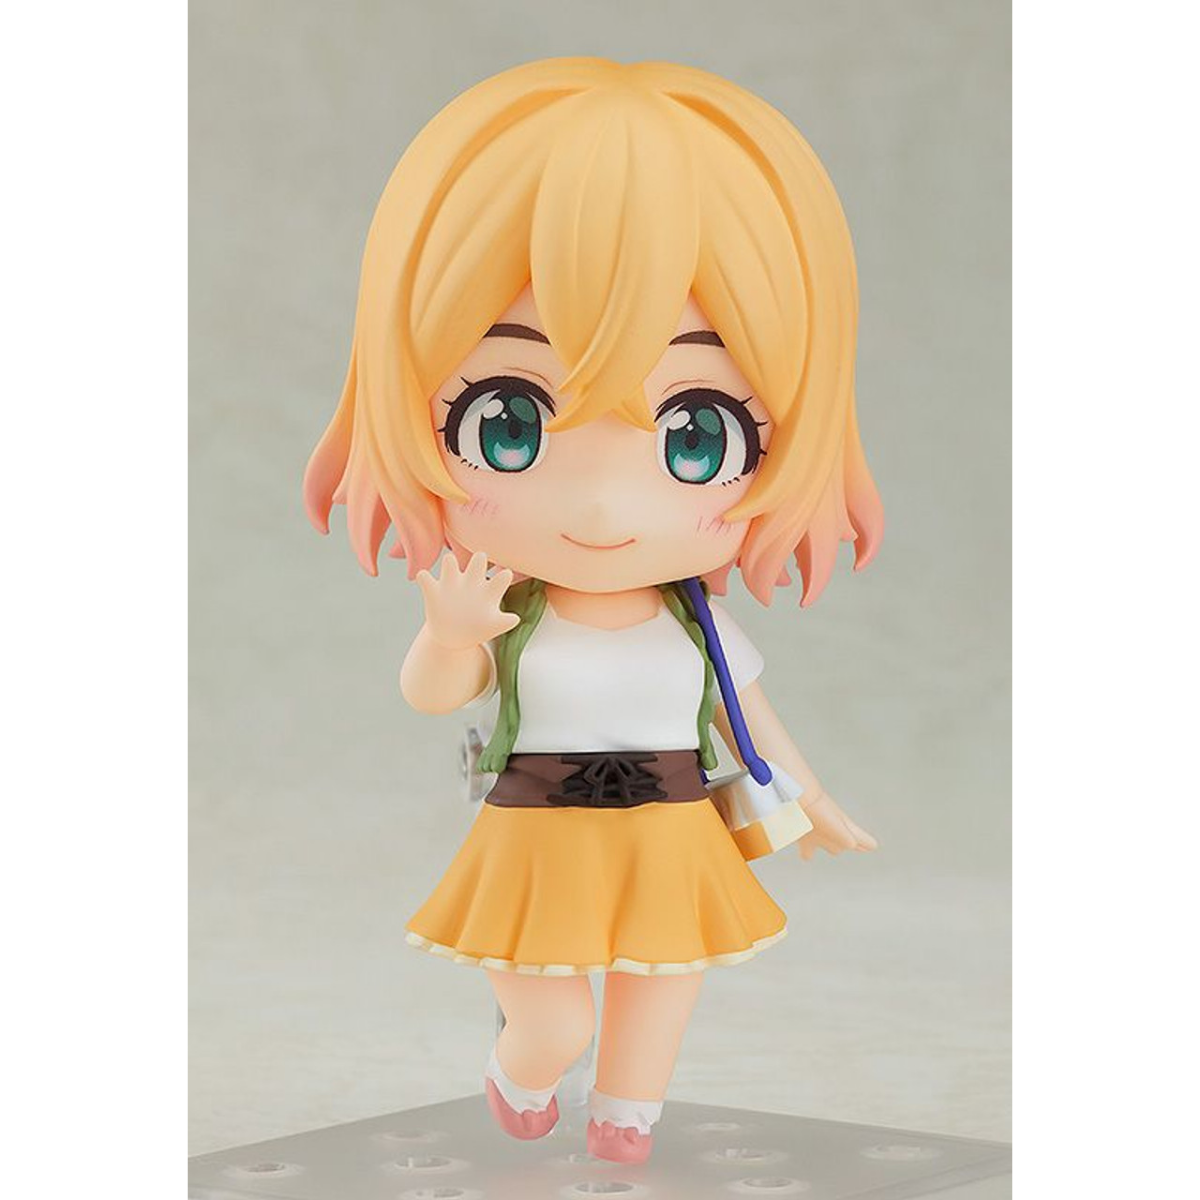 Rent-A-Girlfriend Nendoroid [1934] "Mami Nanami"-Good Smile Company-Ace Cards & Collectibles